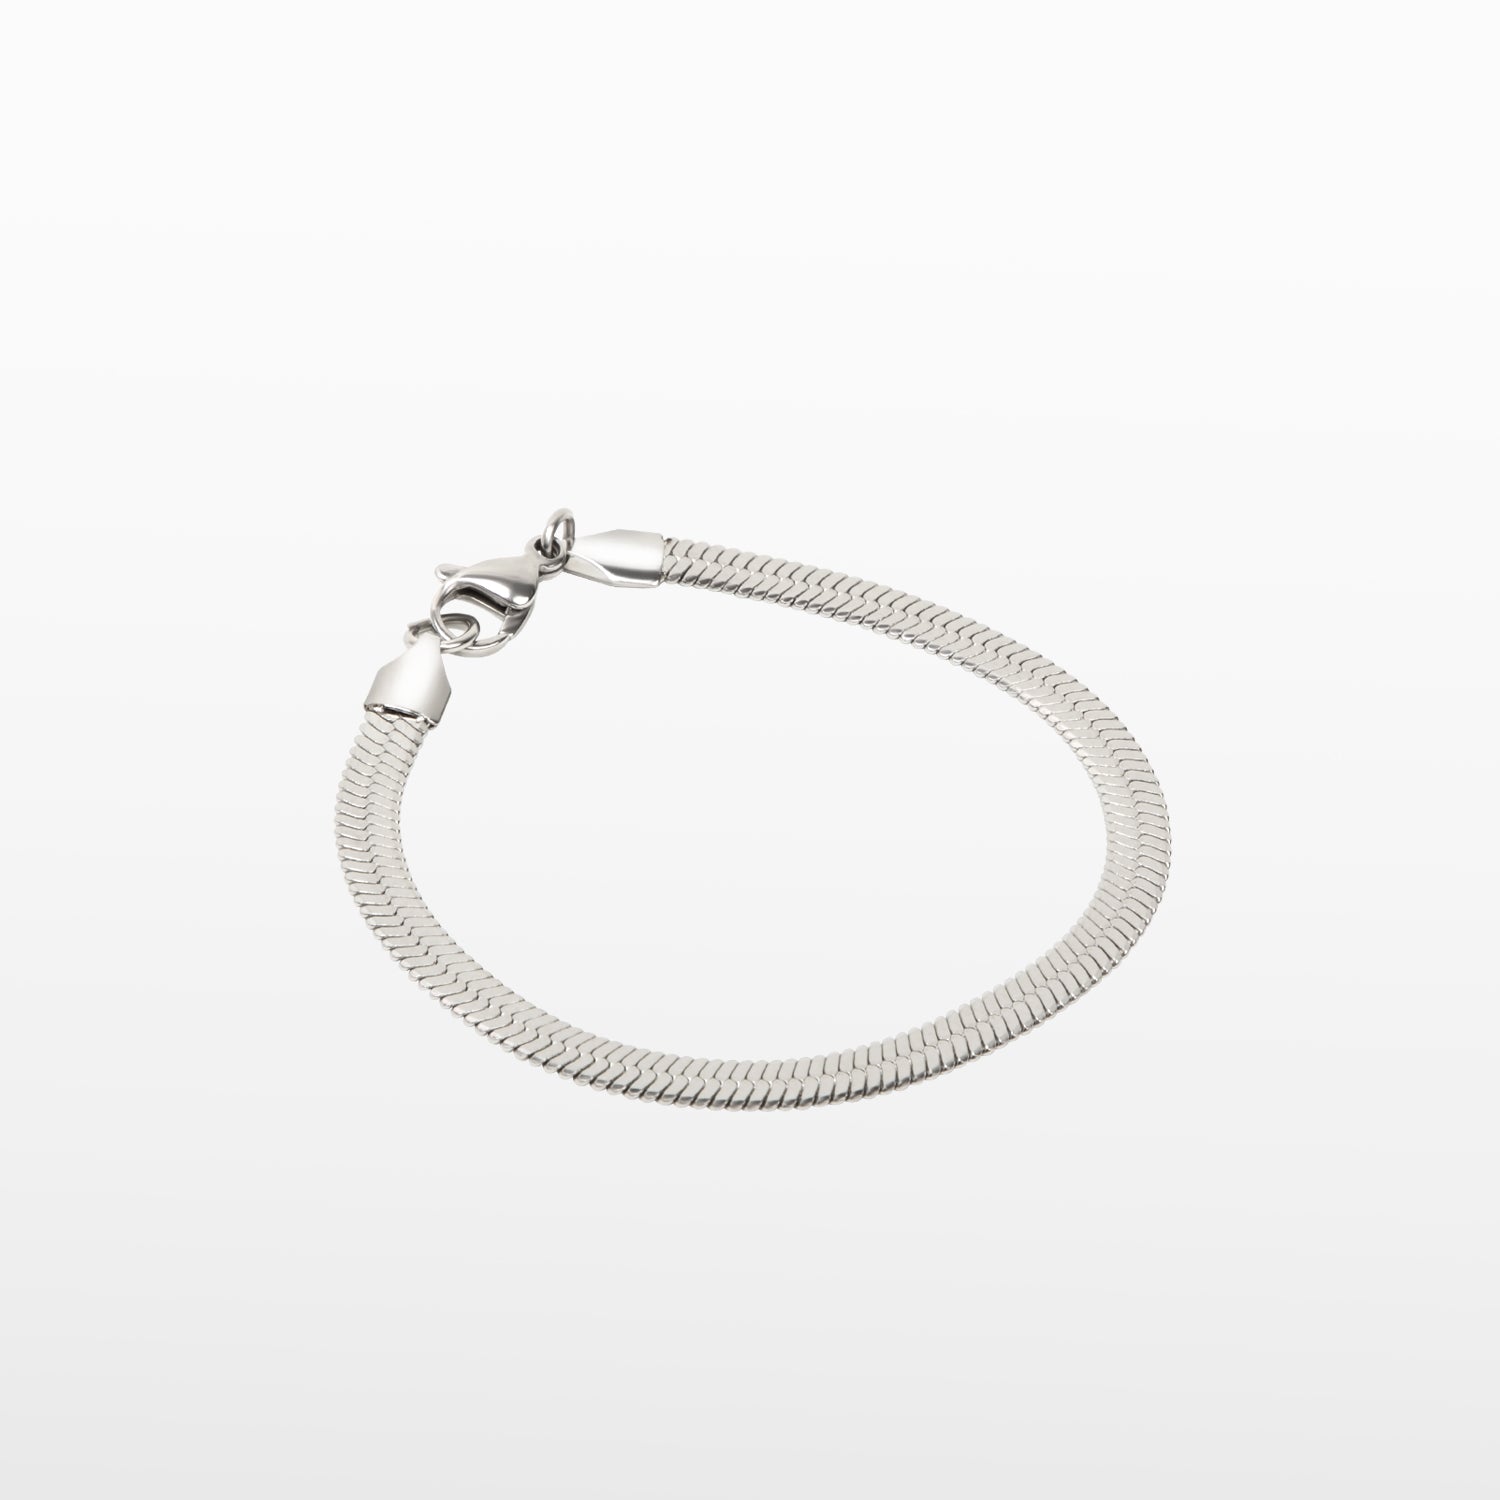 Image of the Herringbone Chain Bracelet in Silver is crafted with stainless steel and measures 18cm long and 5mm wide. It is also non-tarnish and water resistant.